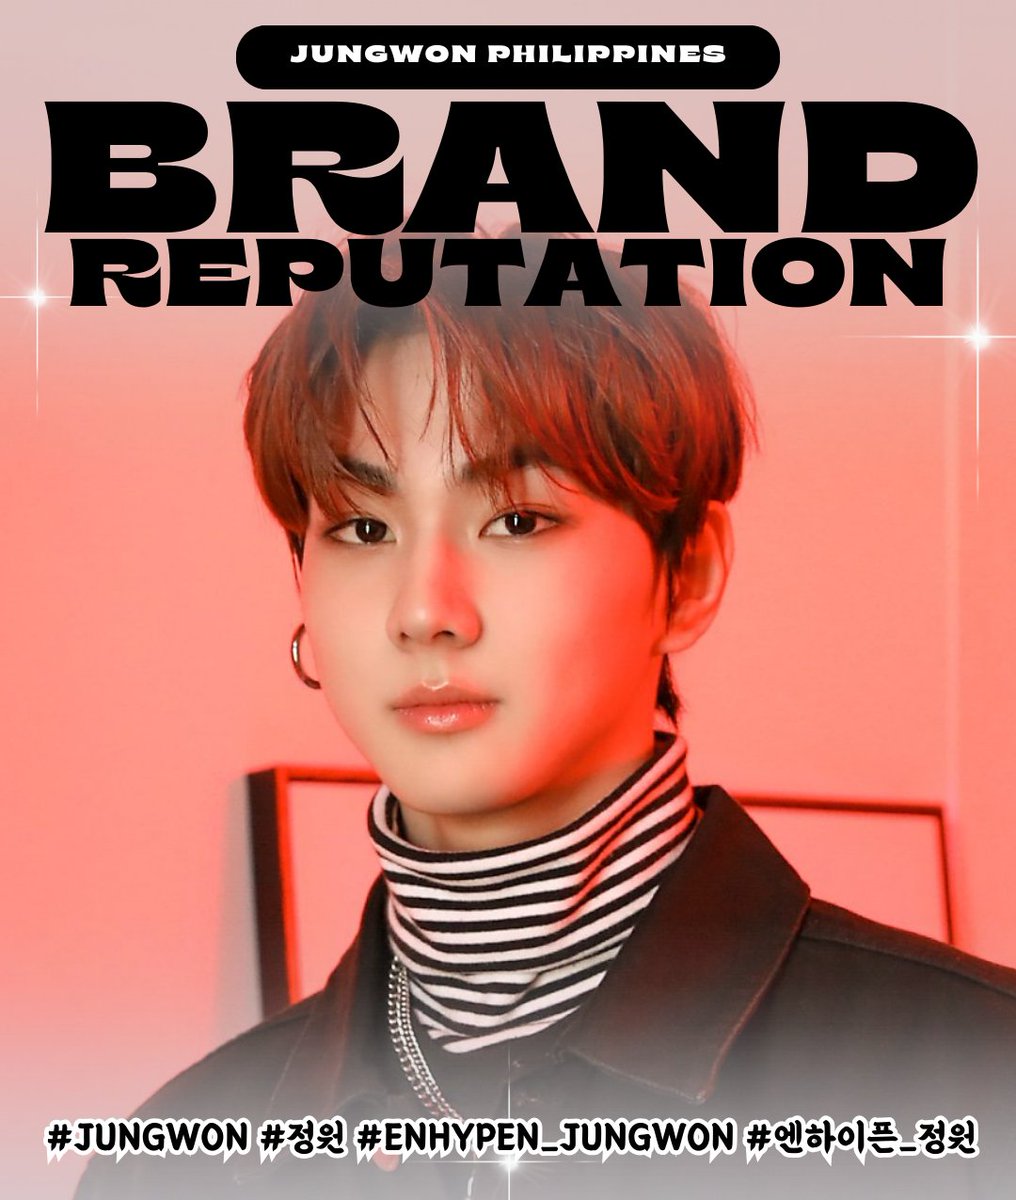 Boost JUNGWON’s Brand Reputation by reposting, replying or using his hashtags here on X! #JUNGWON #정원 #ENHYPEN_JUNGWON #엔하이픈_정원 @ENHYPEN @ENHYPEN_members